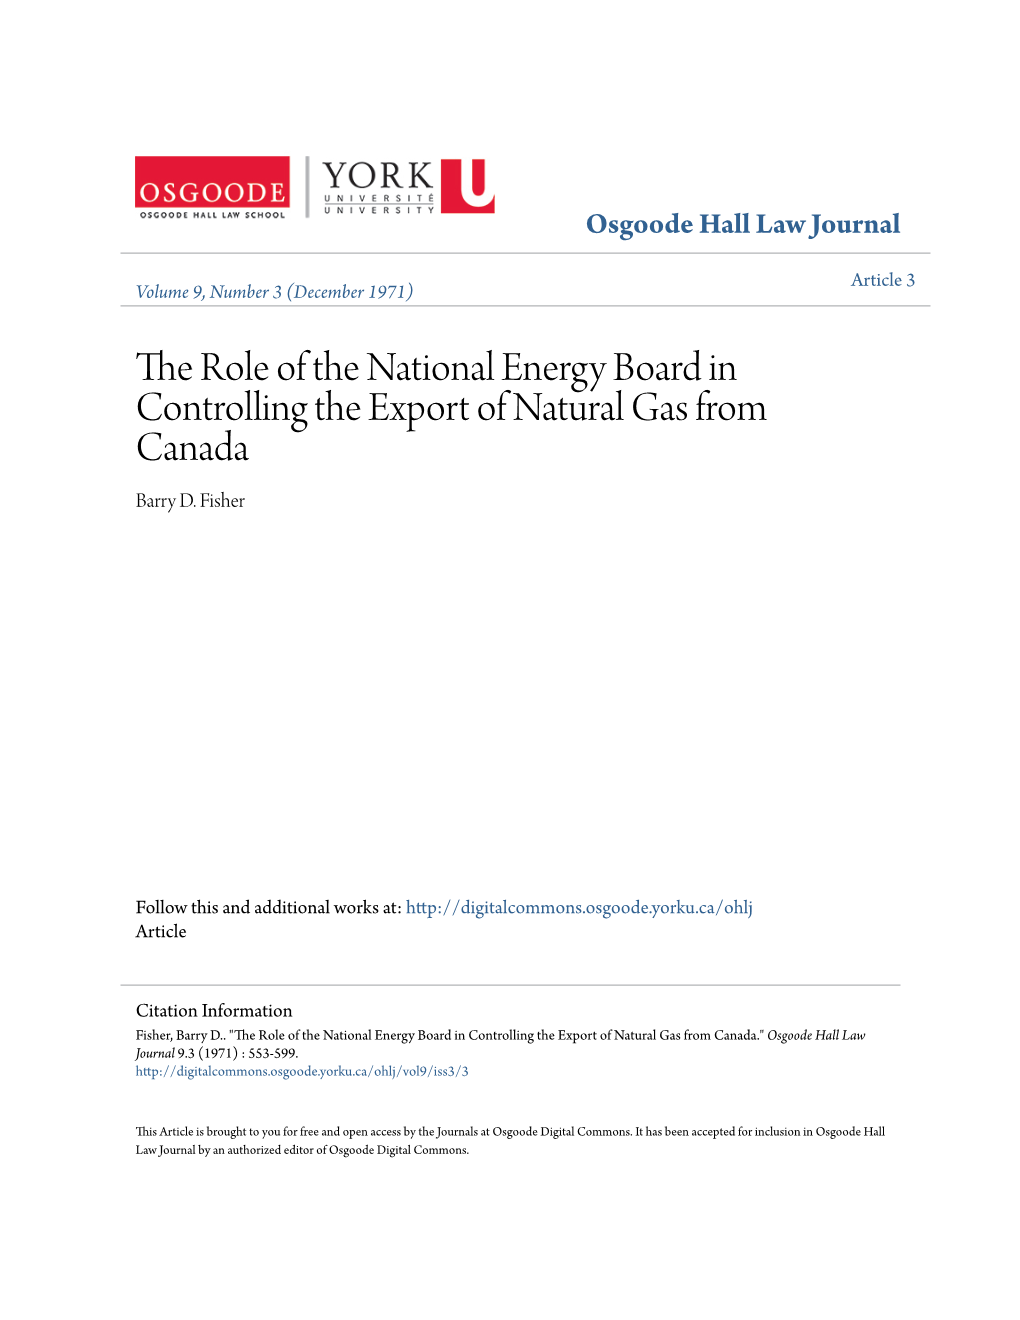 The Role of the National Energy Board in Controlling the Export of Natural Gas from Canada Barry D